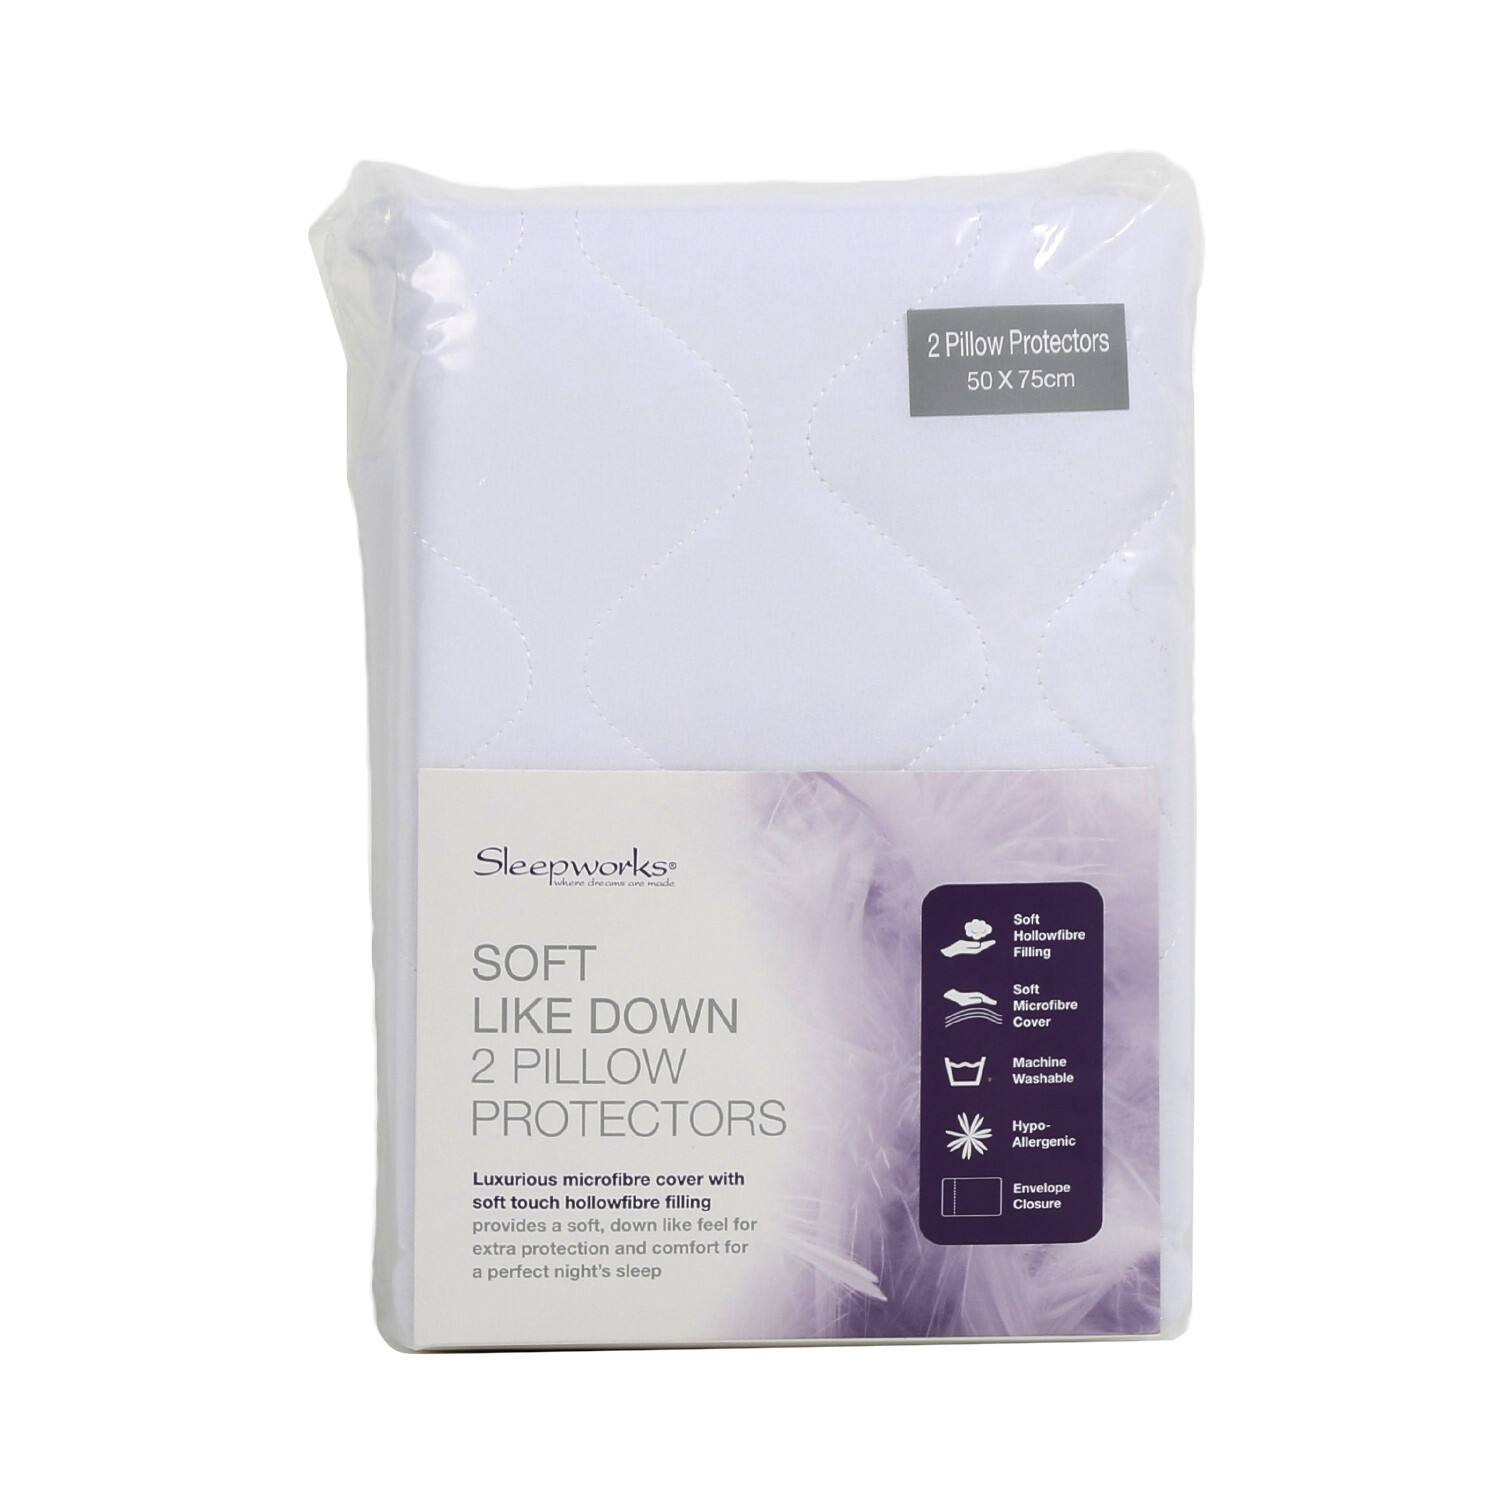 Sleepworks Soft Like Down White Pillow Protector 50 x 75cm 2 Pack Image